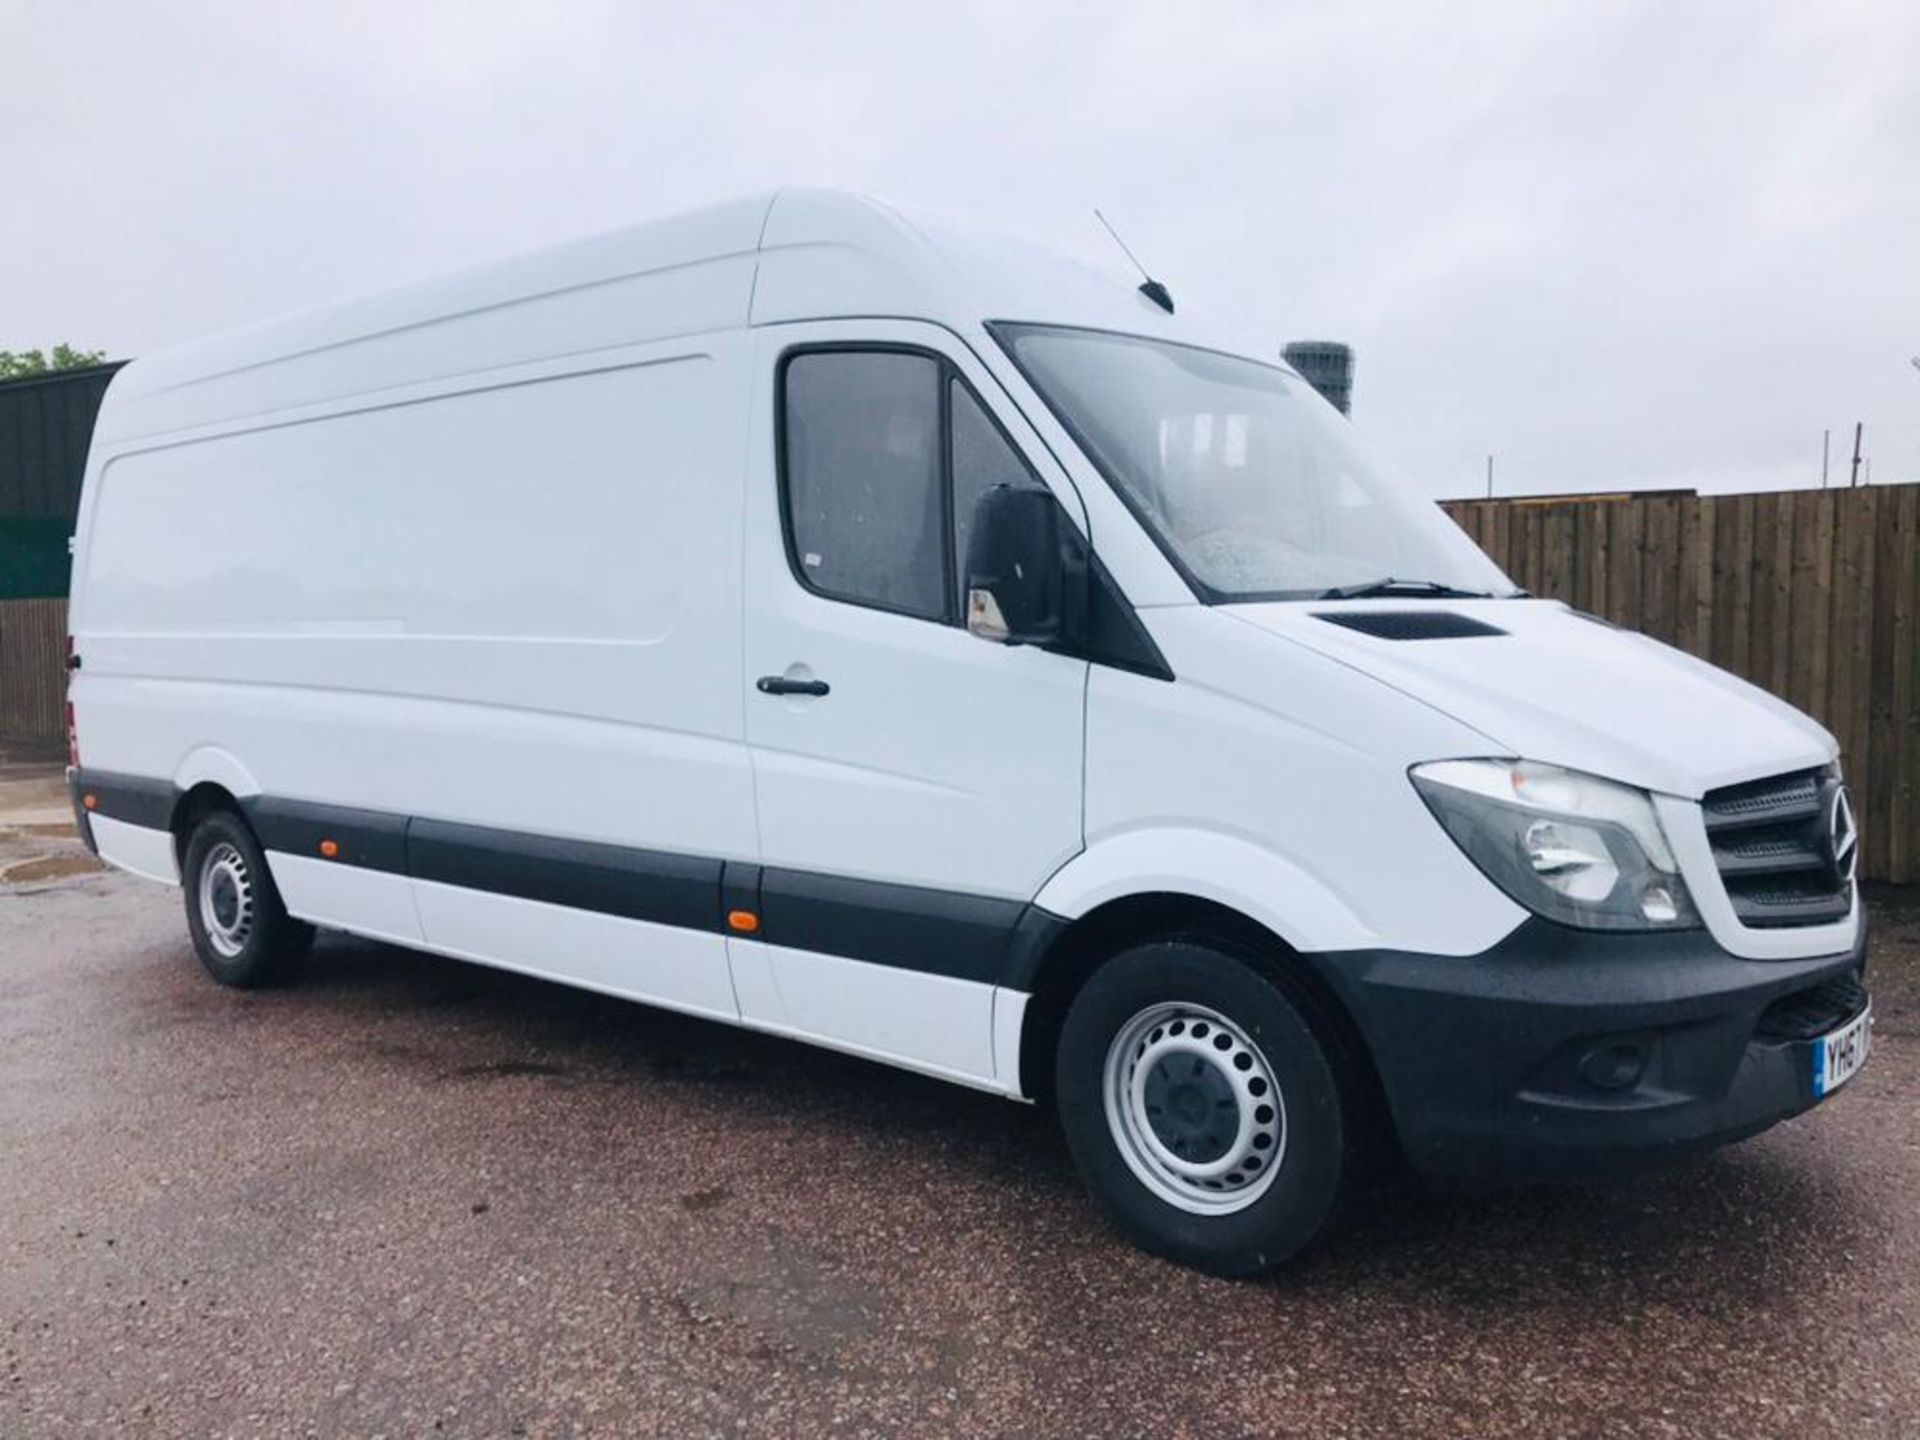 (ON SALE) MERCEDES SPRINTER 314CDI "140BHP" LWB (2018 MODEL) EURO 6 - LONDON COMPLIANT-DONT MISS OUT - Image 7 of 19